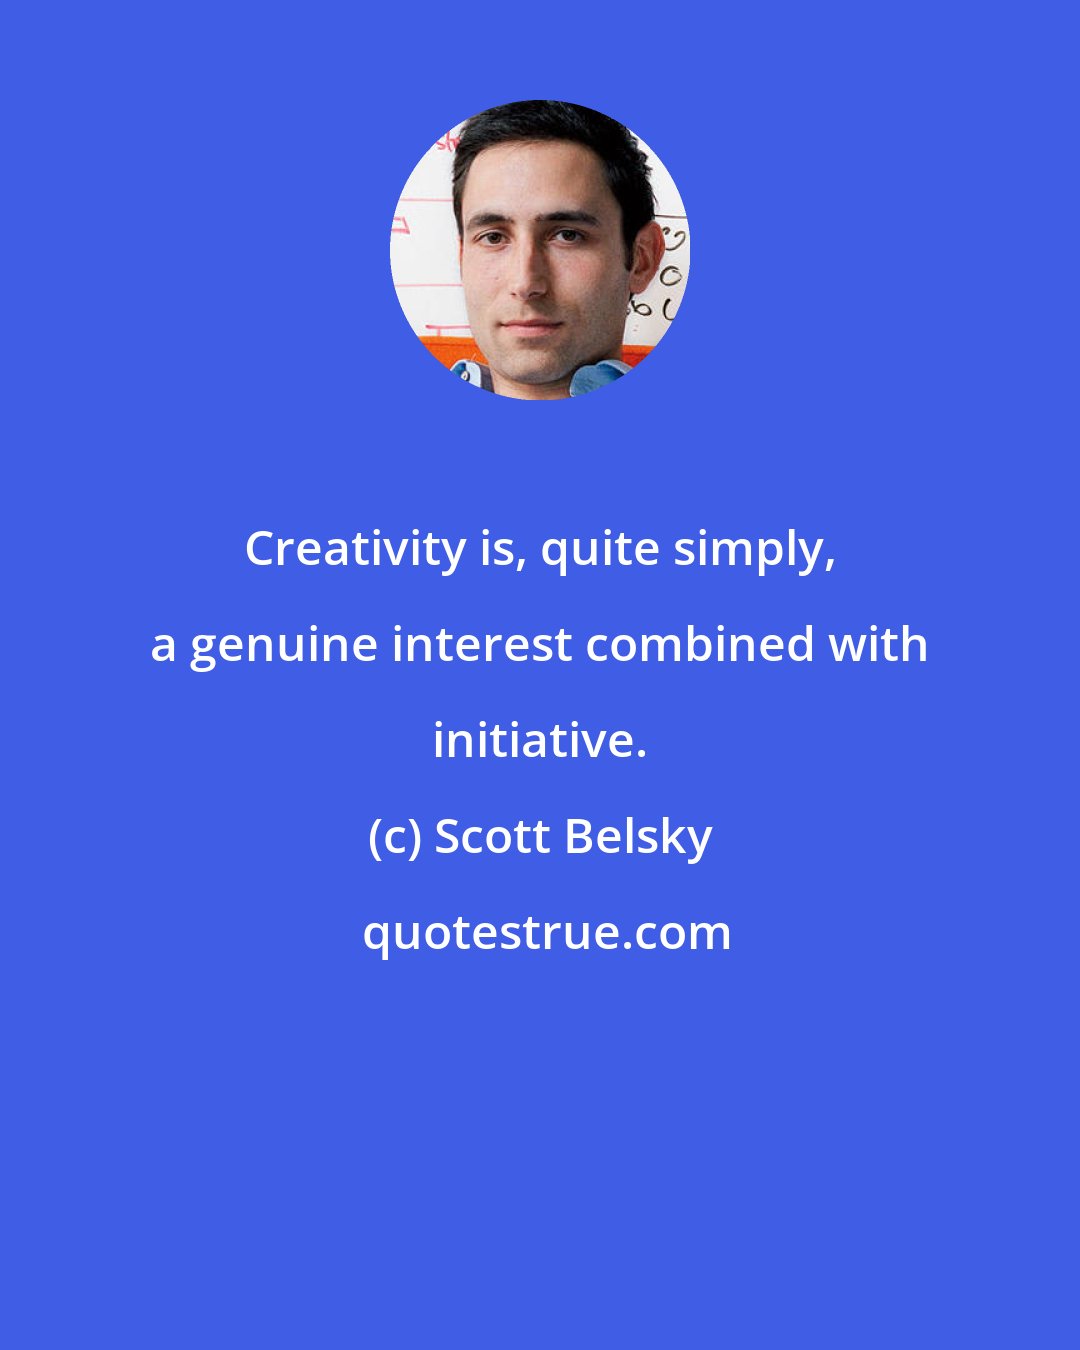 Scott Belsky: Creativity is, quite simply, a genuine interest combined with initiative.